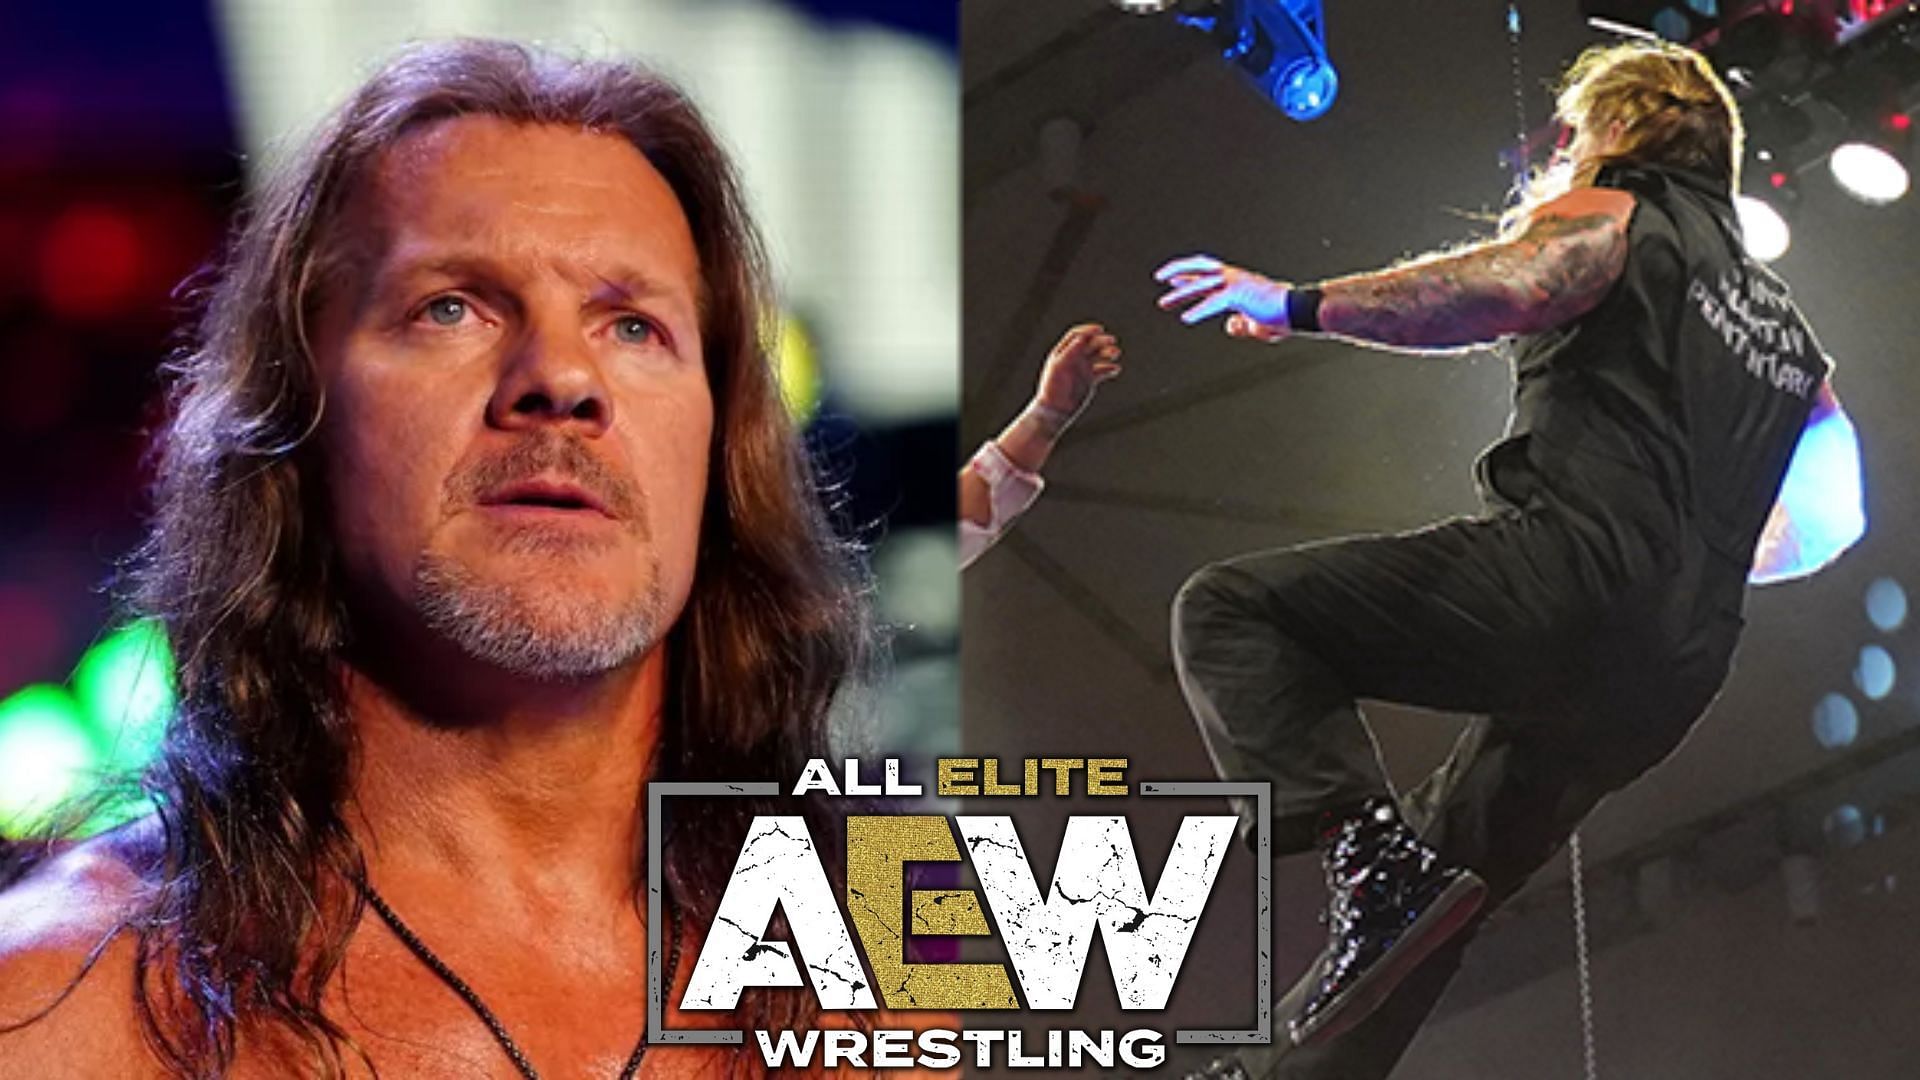 My Wife Was Furious – Chris Jericho Discloses Multiple Horrific Aew